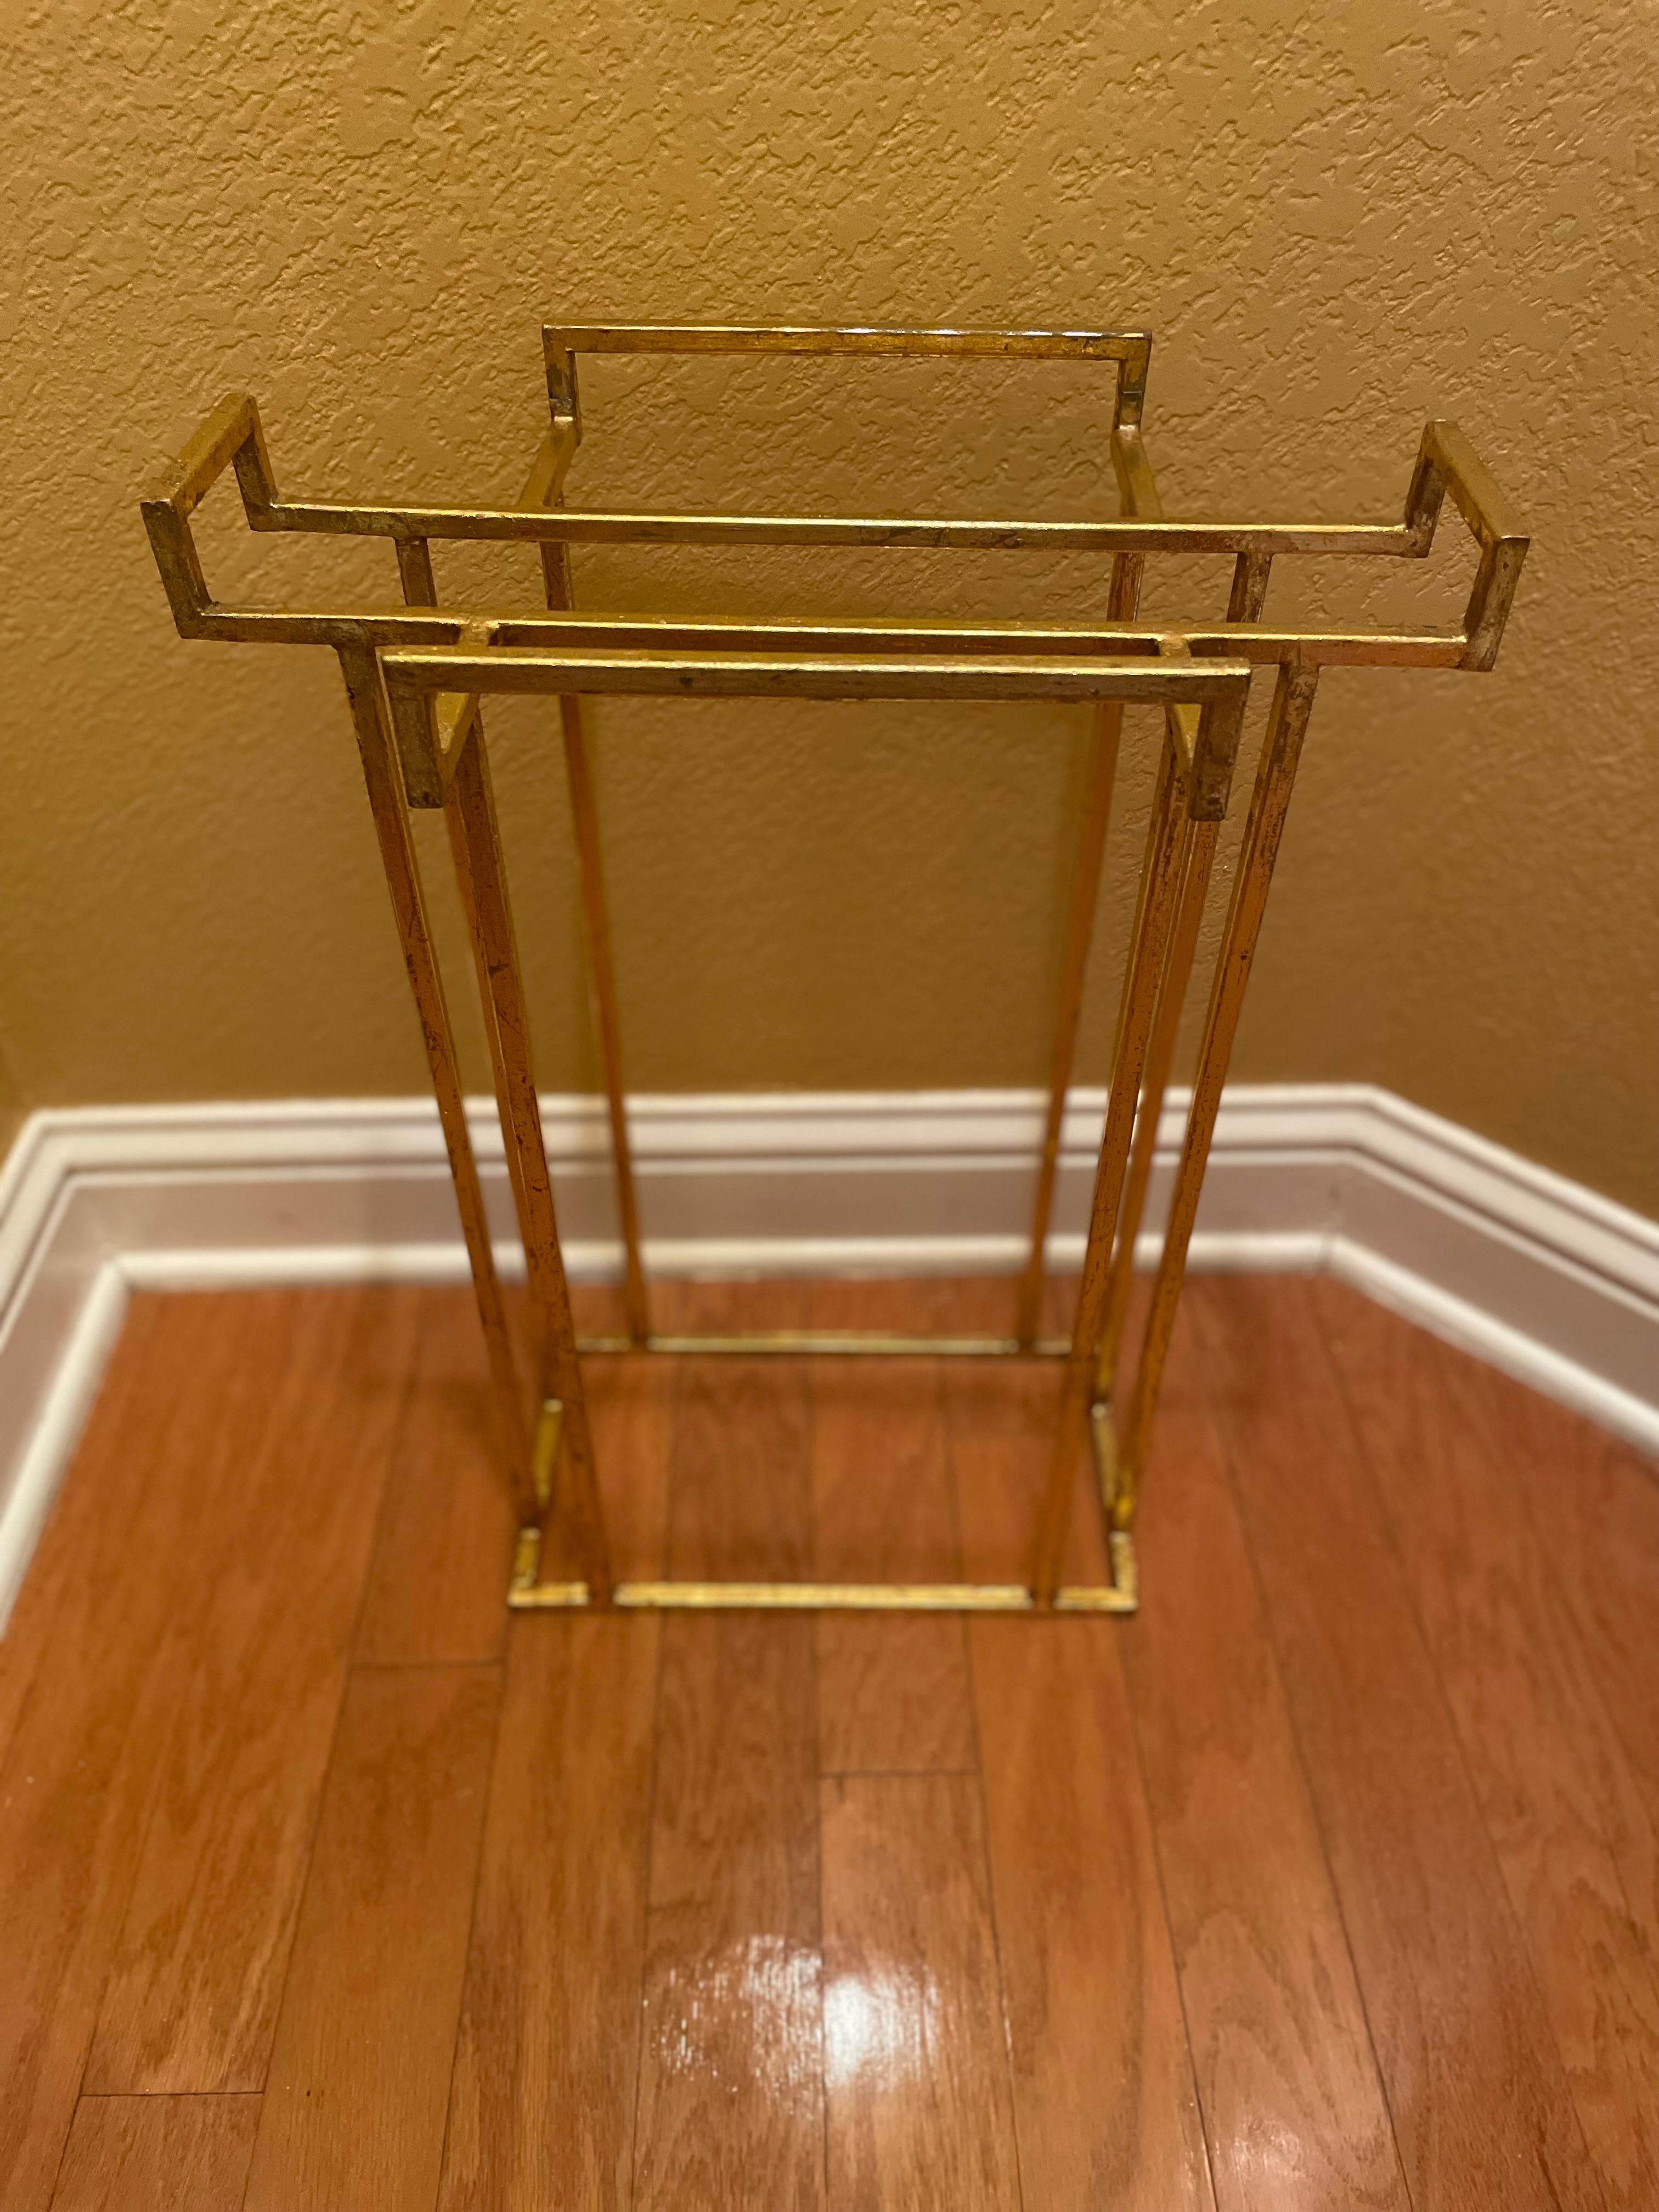 Modern Umbrella Stand -- Gold-Leaf on Metal  In Excellent Condition For Sale In Austin, TX